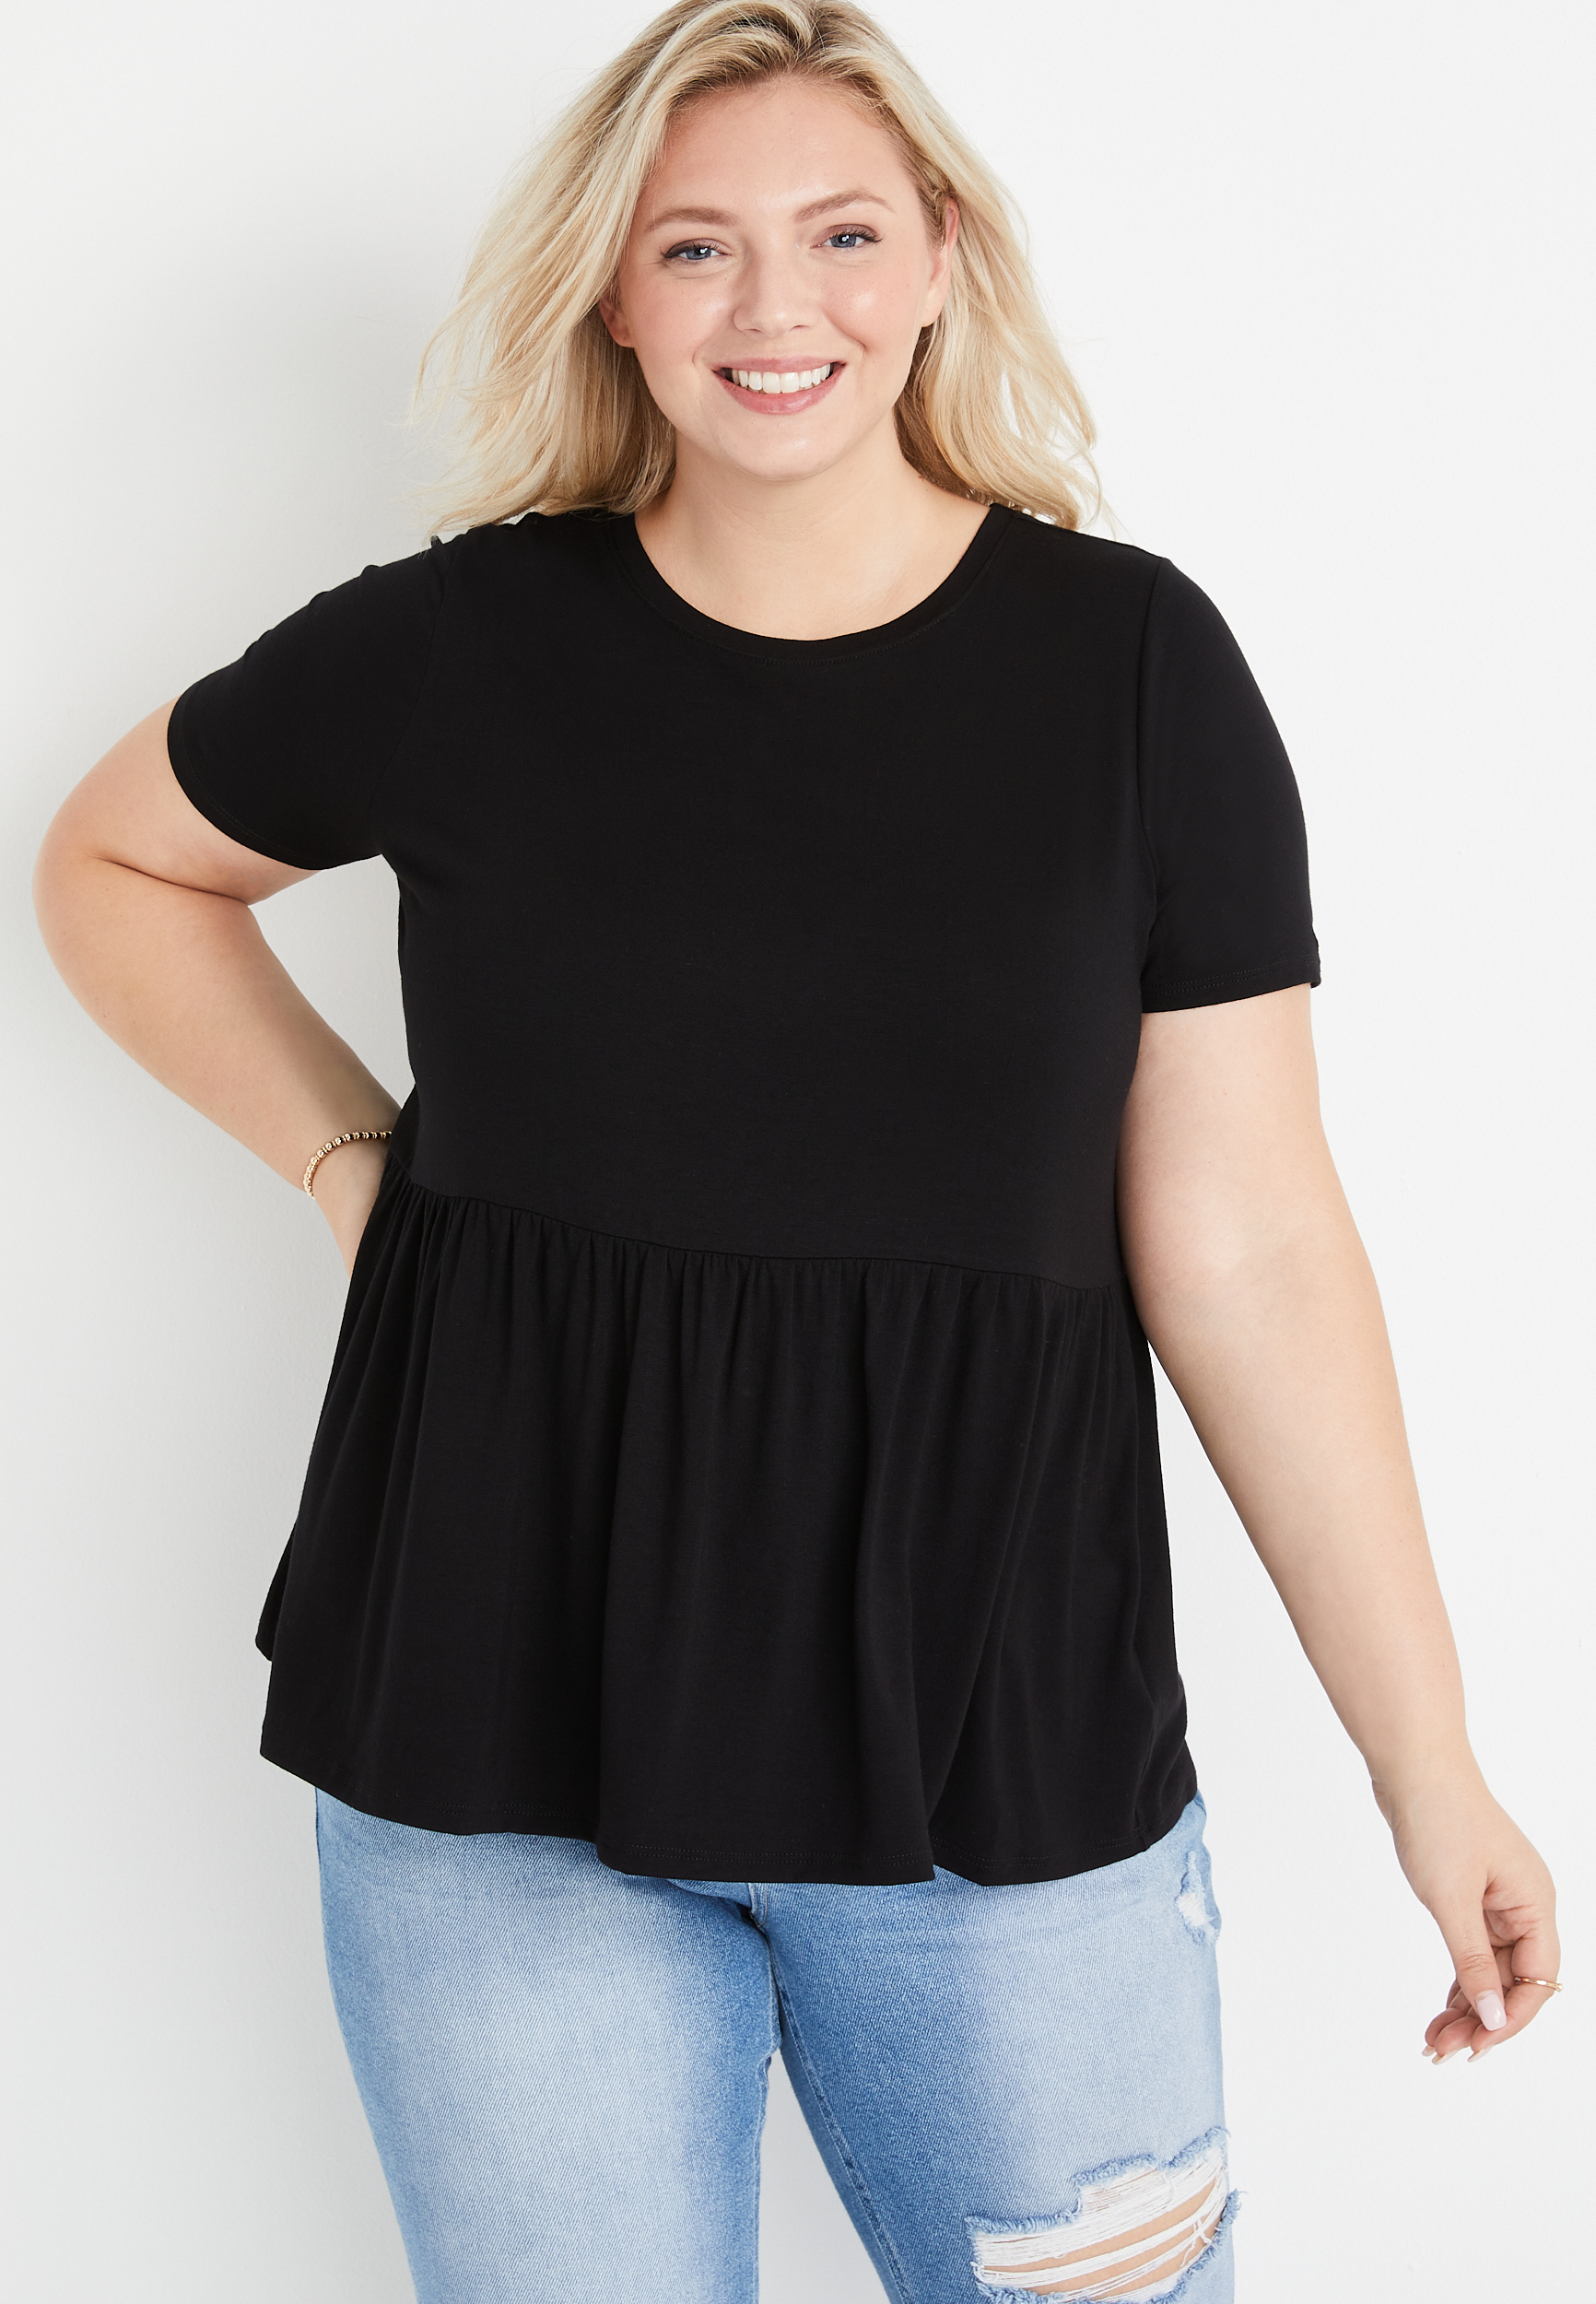 Plus Size Black Babydoll Tee | maurices